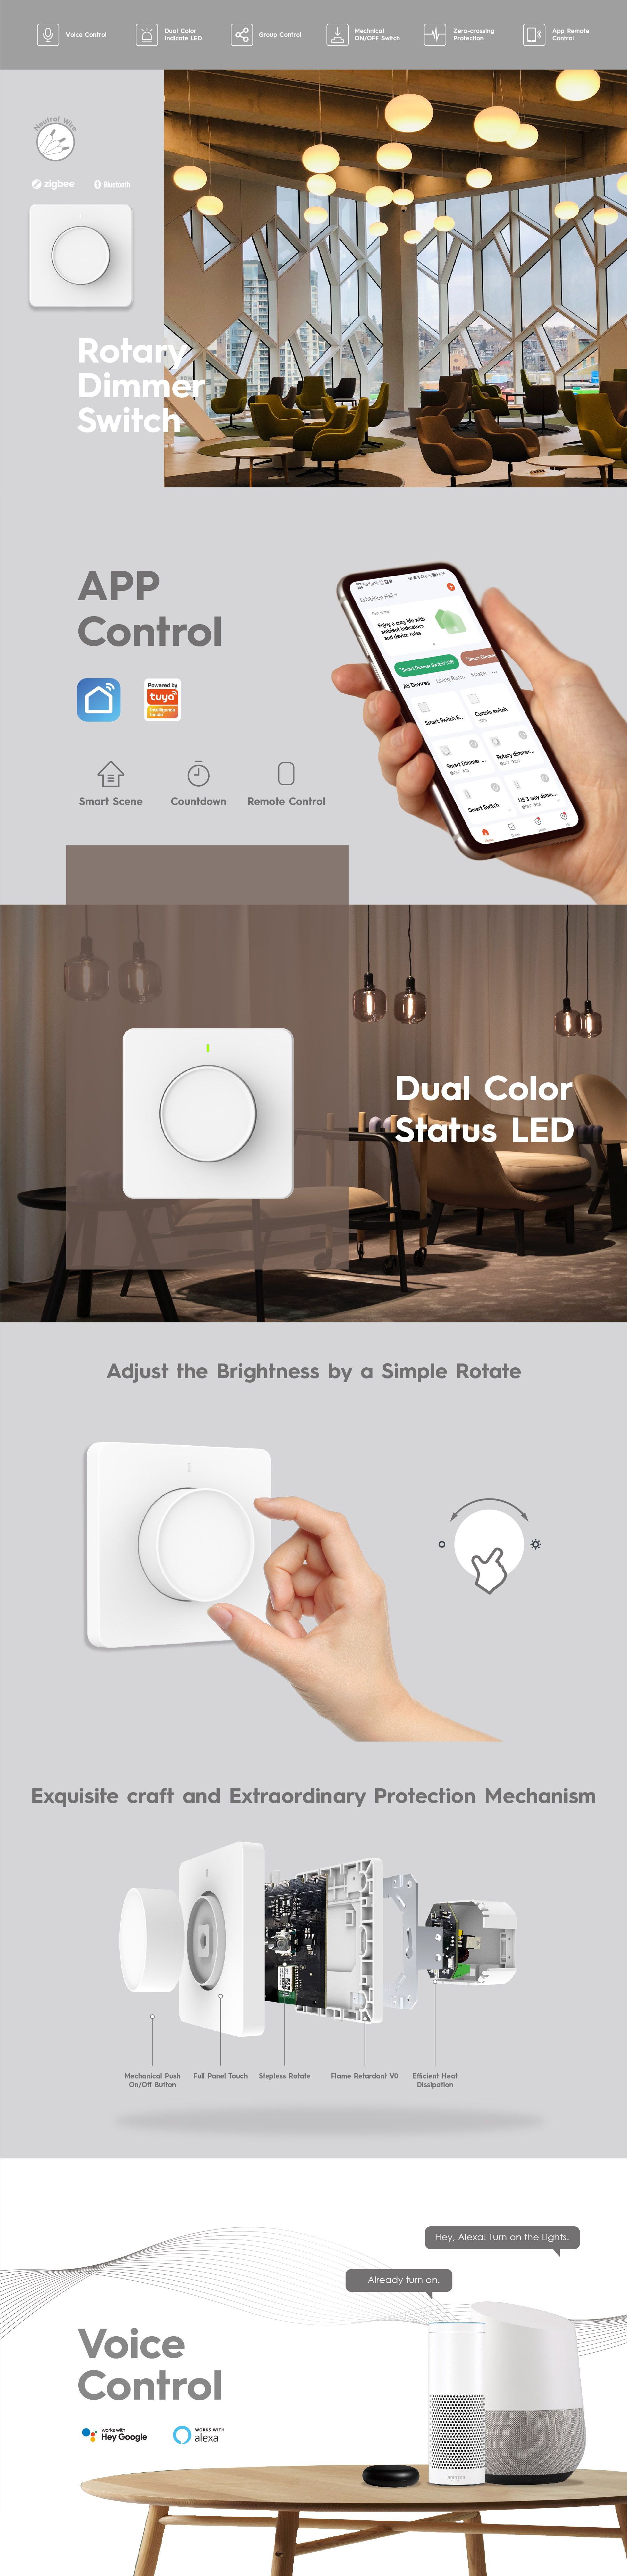 Smart Rotary Dimmer Switch